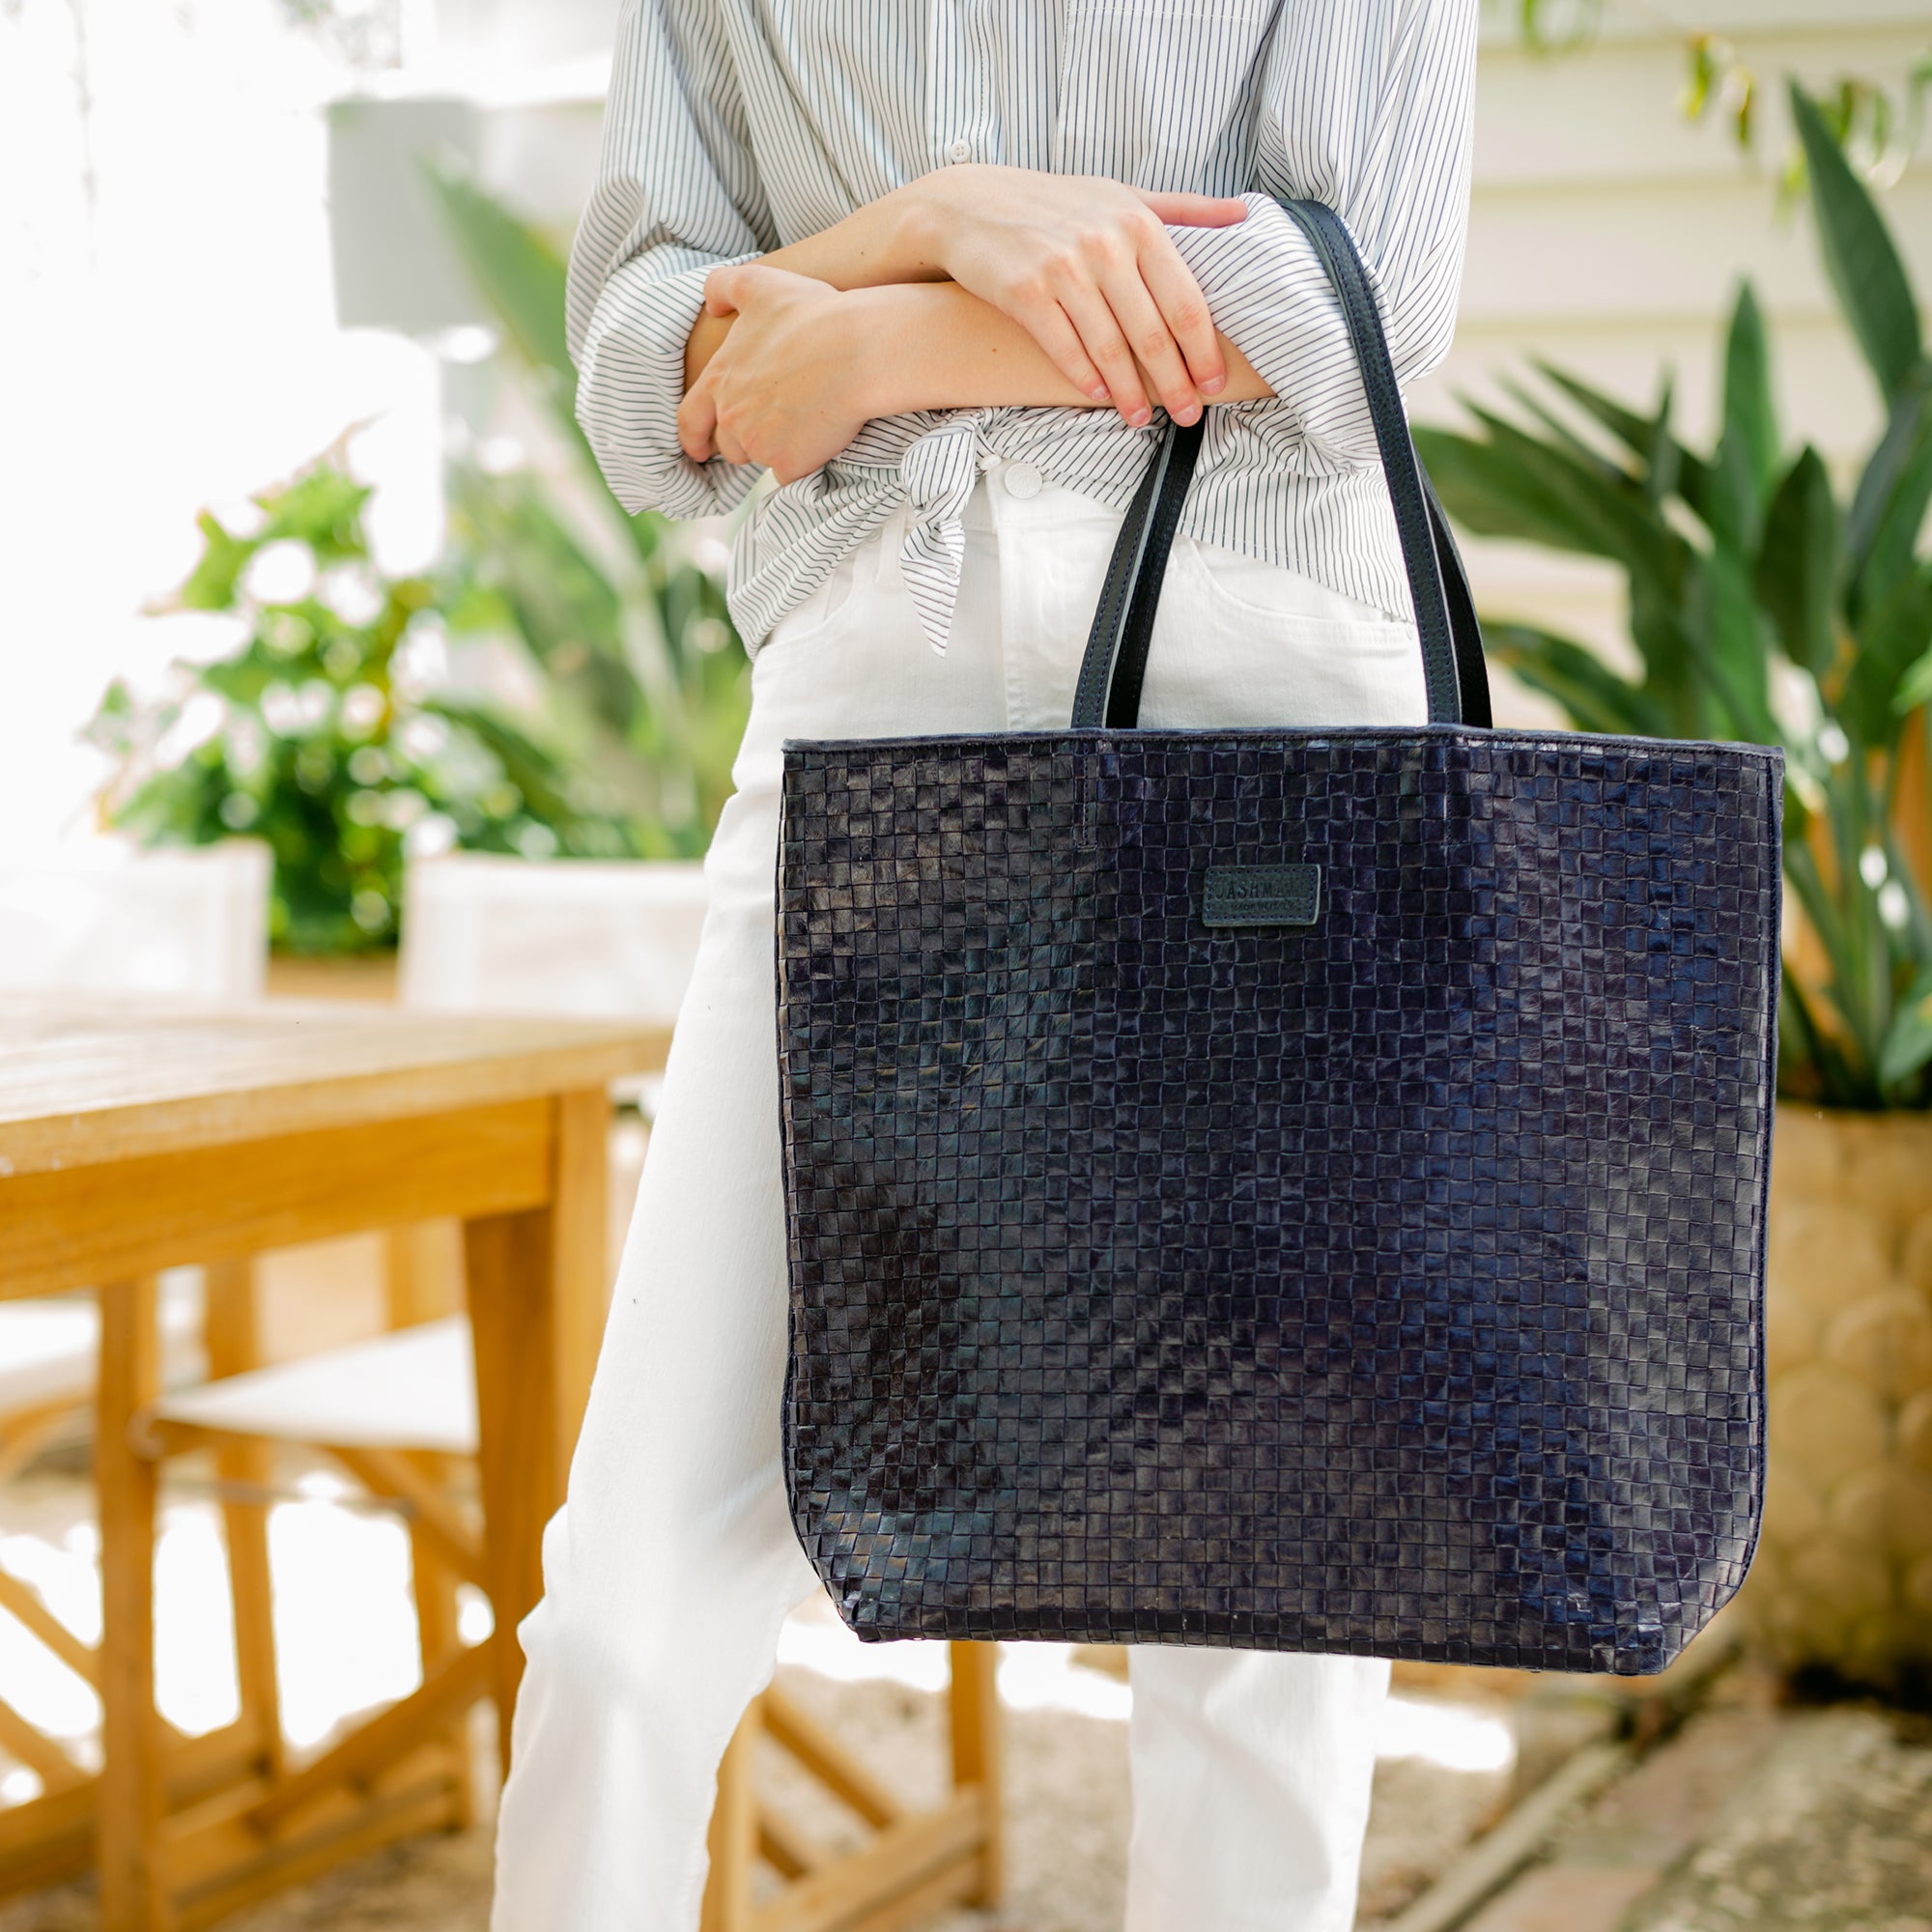 TOSCA WOVEN OVERSIZED TOTE BAG